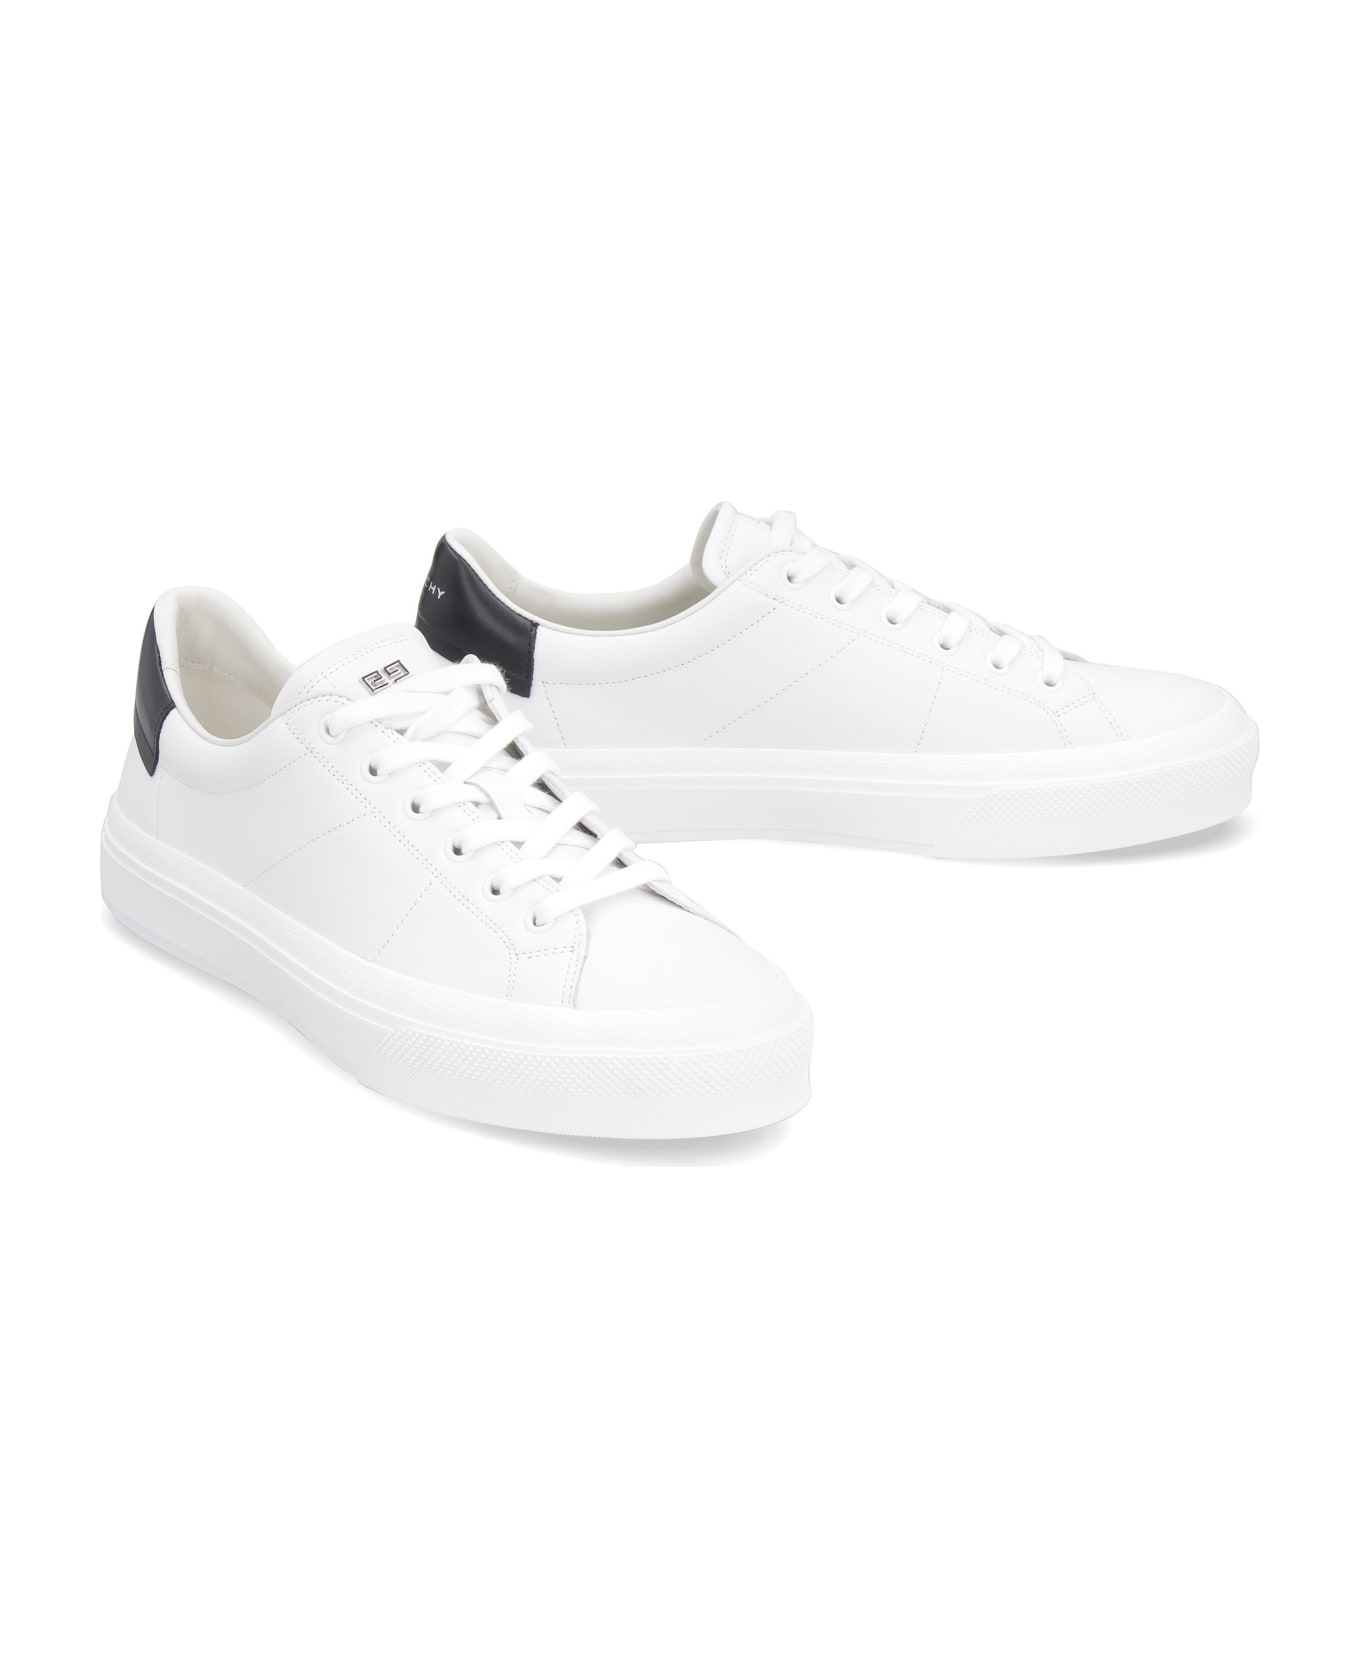 Givenchy City Leather Sneakers - BIANCO/NERO